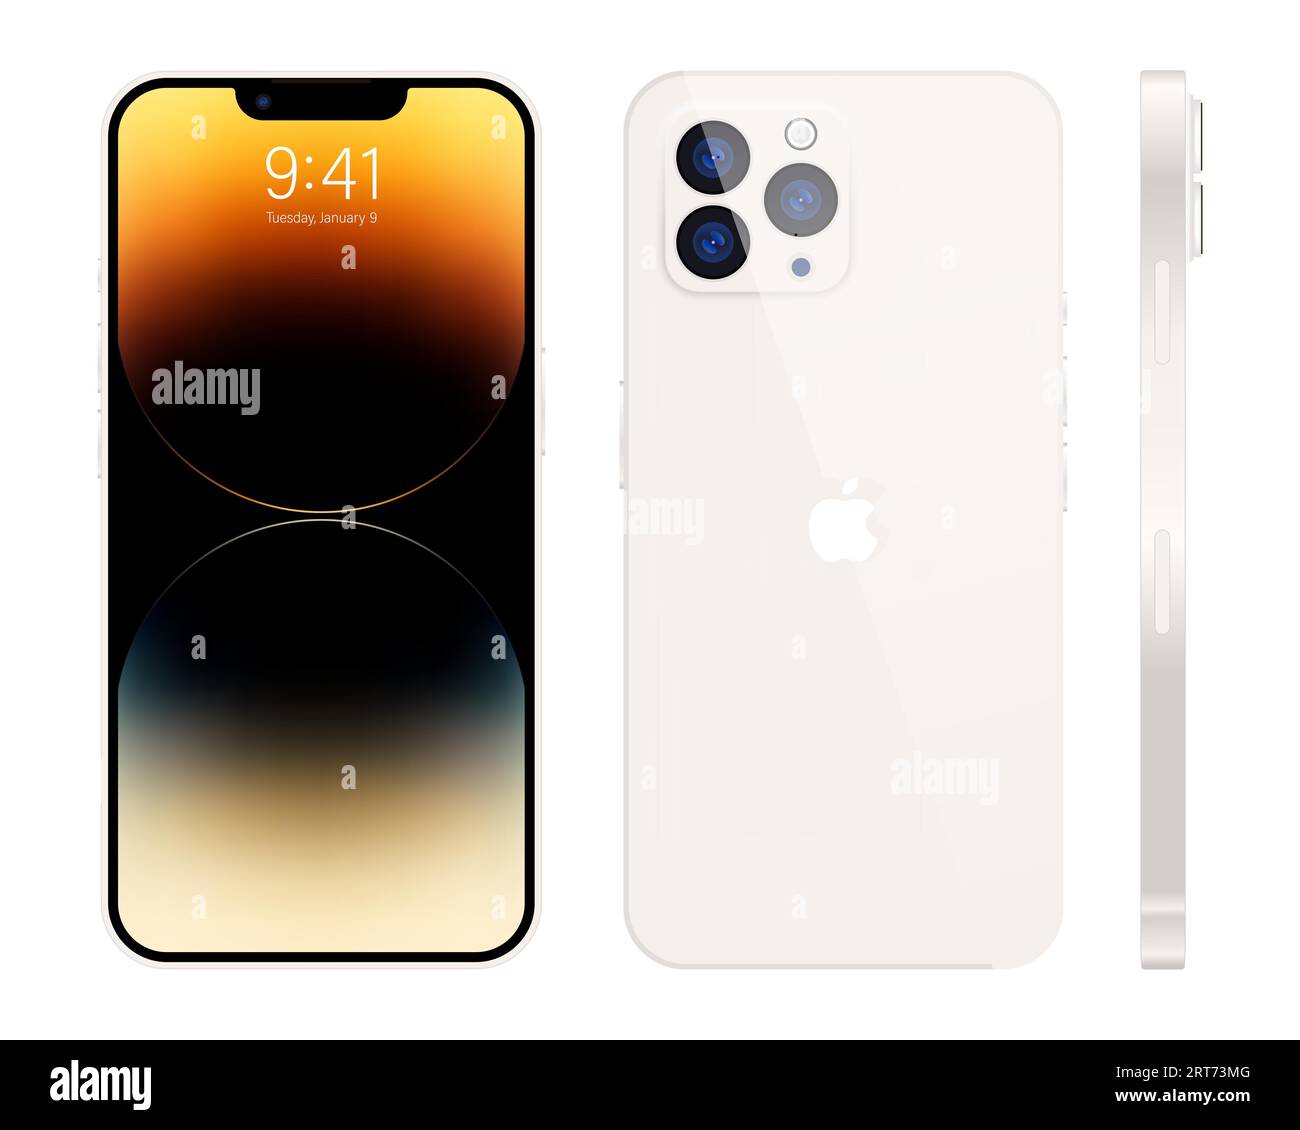 New iPhone 15 pro, pro max white color by Apple Inc. Mock-up screen iphone and back side iphone. High Quality. Official presentation. Editorial. Stock Vector